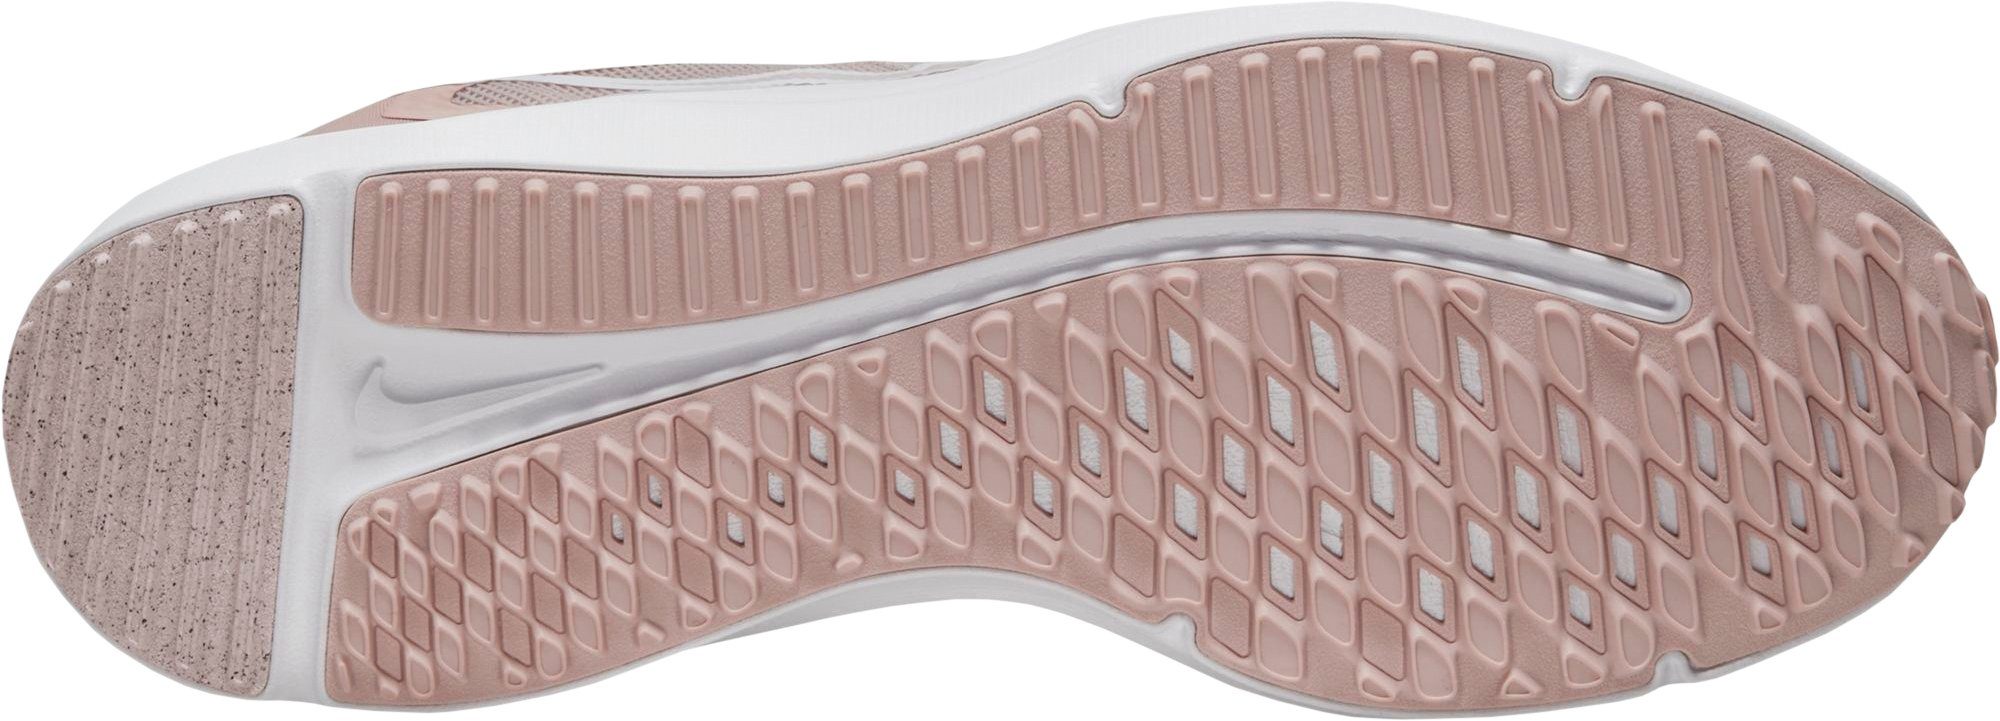 Laufschuh 12 BARELY-ROSE-WHITE-PINK-OXFORD Nike DOWNSHIFTER